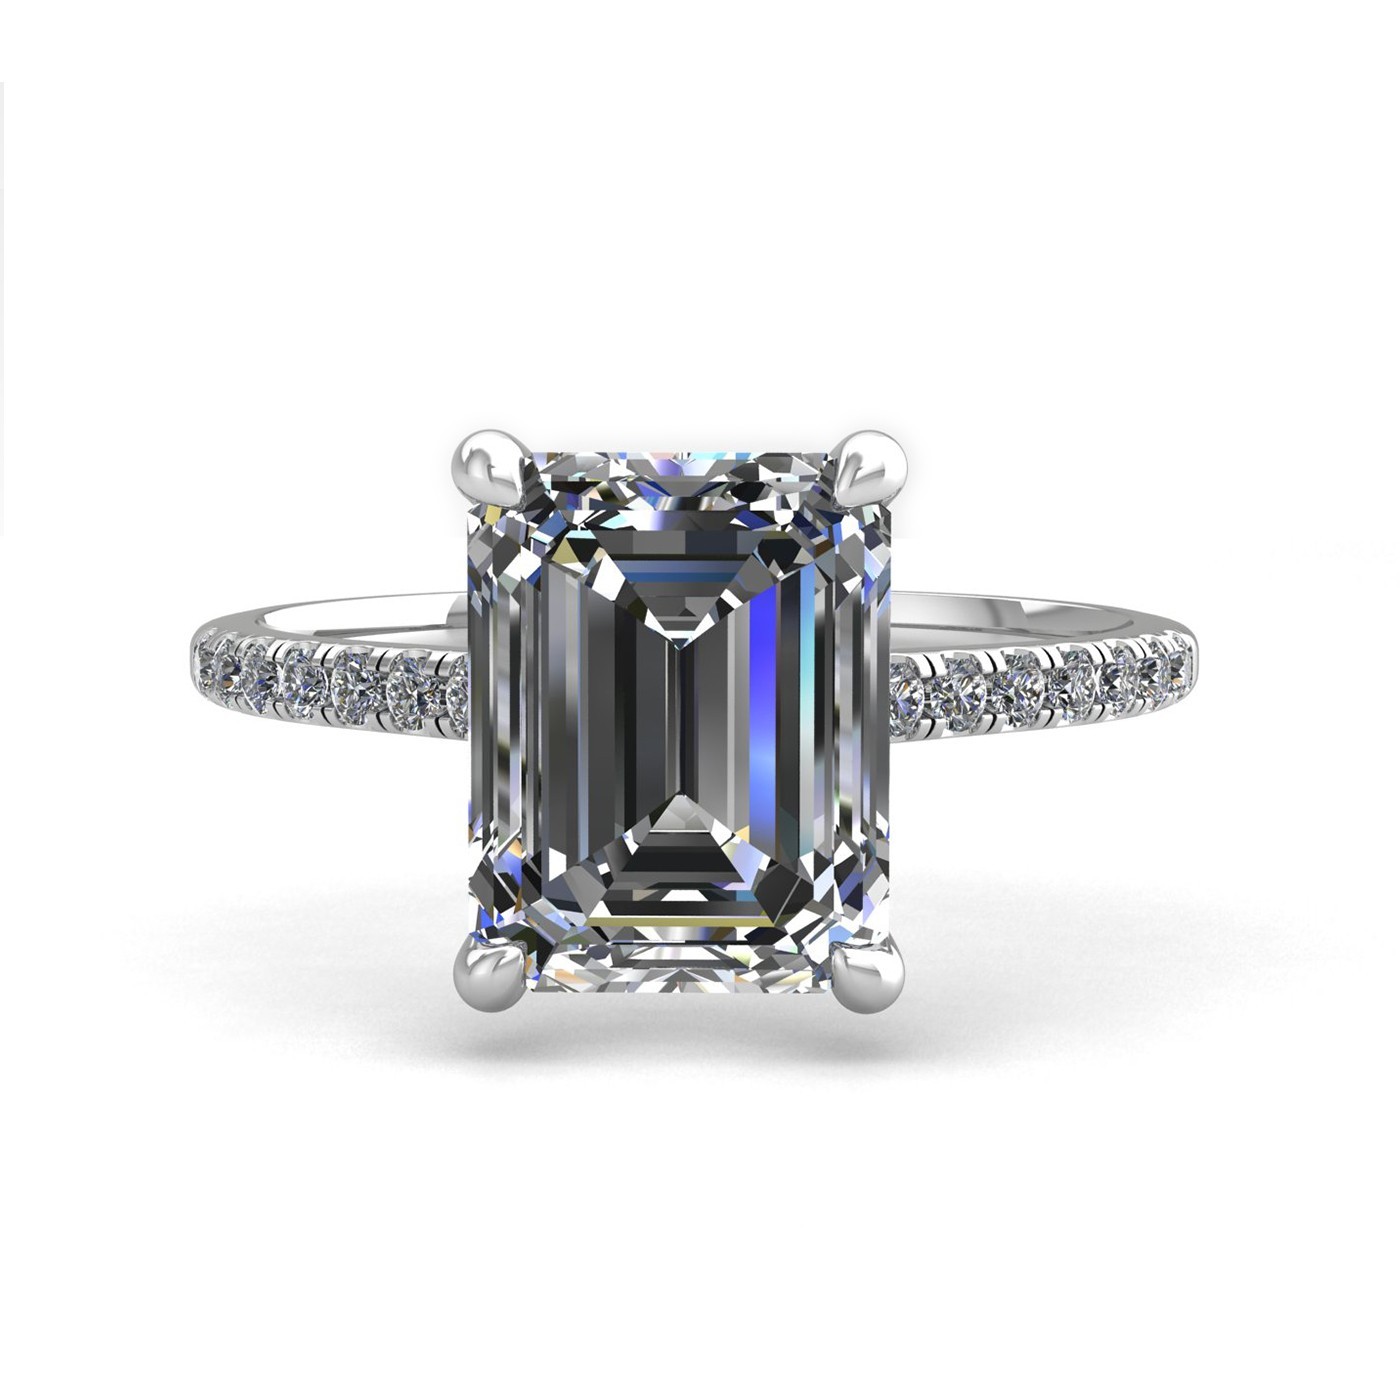 18k white gold  0,80 ct 4 prongs emerald cut diamond engagement ring with whisper thin pavÉ set band Photos & images